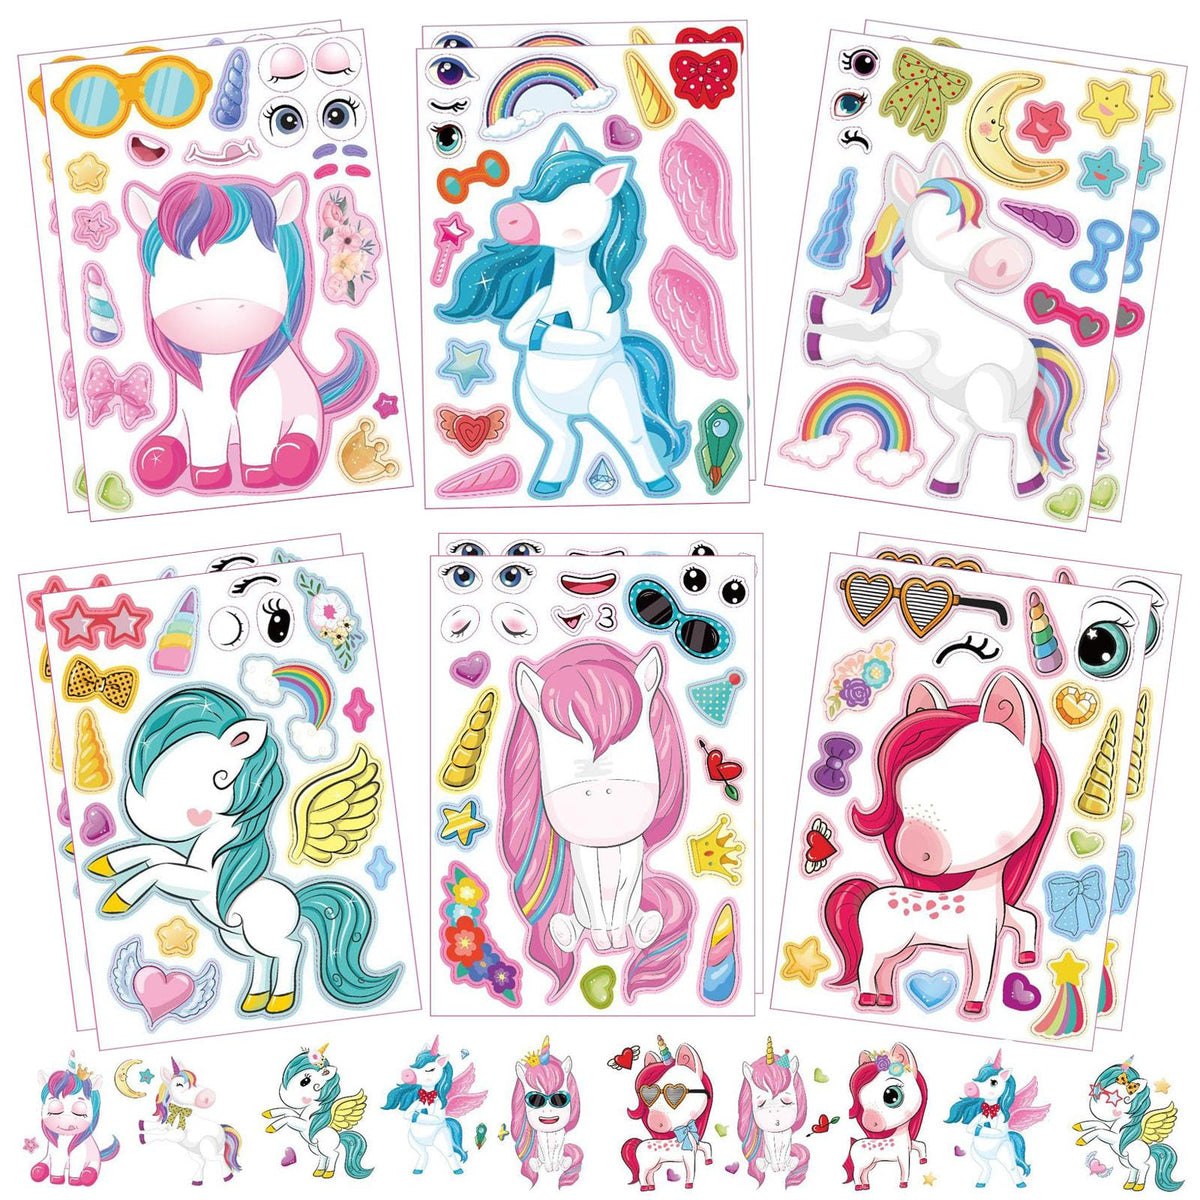 12 Sheets Stickers for Kids DIY Make Unicorn Stickers,Art Craft Make Your Own Personalized Stickers for Birthday Party Supplies Party Bag Filler Favors Stickers for Boys Girls (DIY Unicorn Stickers)